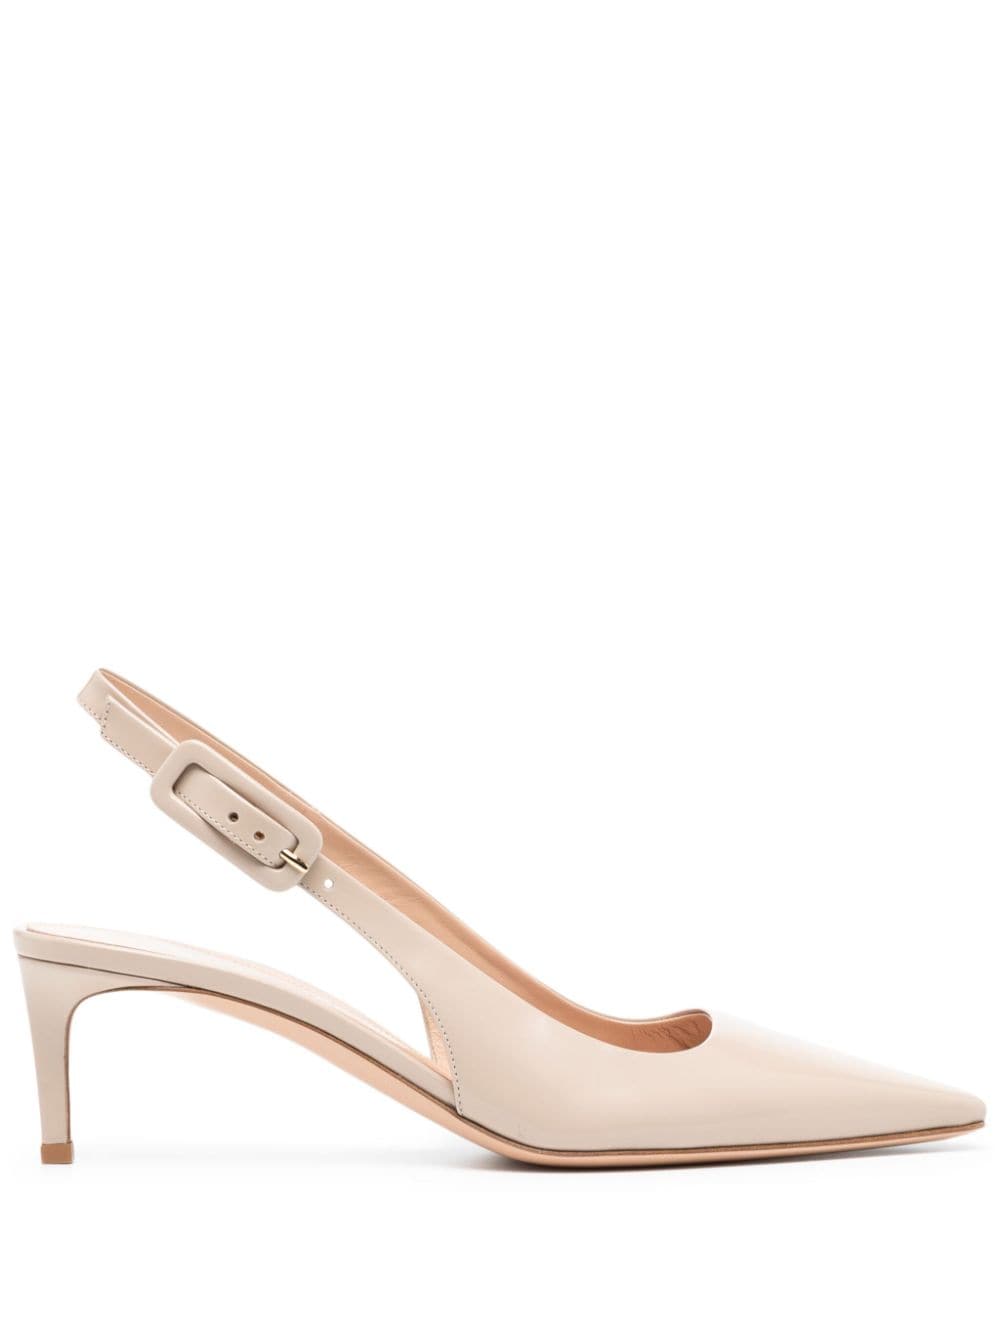 Gianvito Rossi 55mm Leather Slingback Pumps In Neutrals